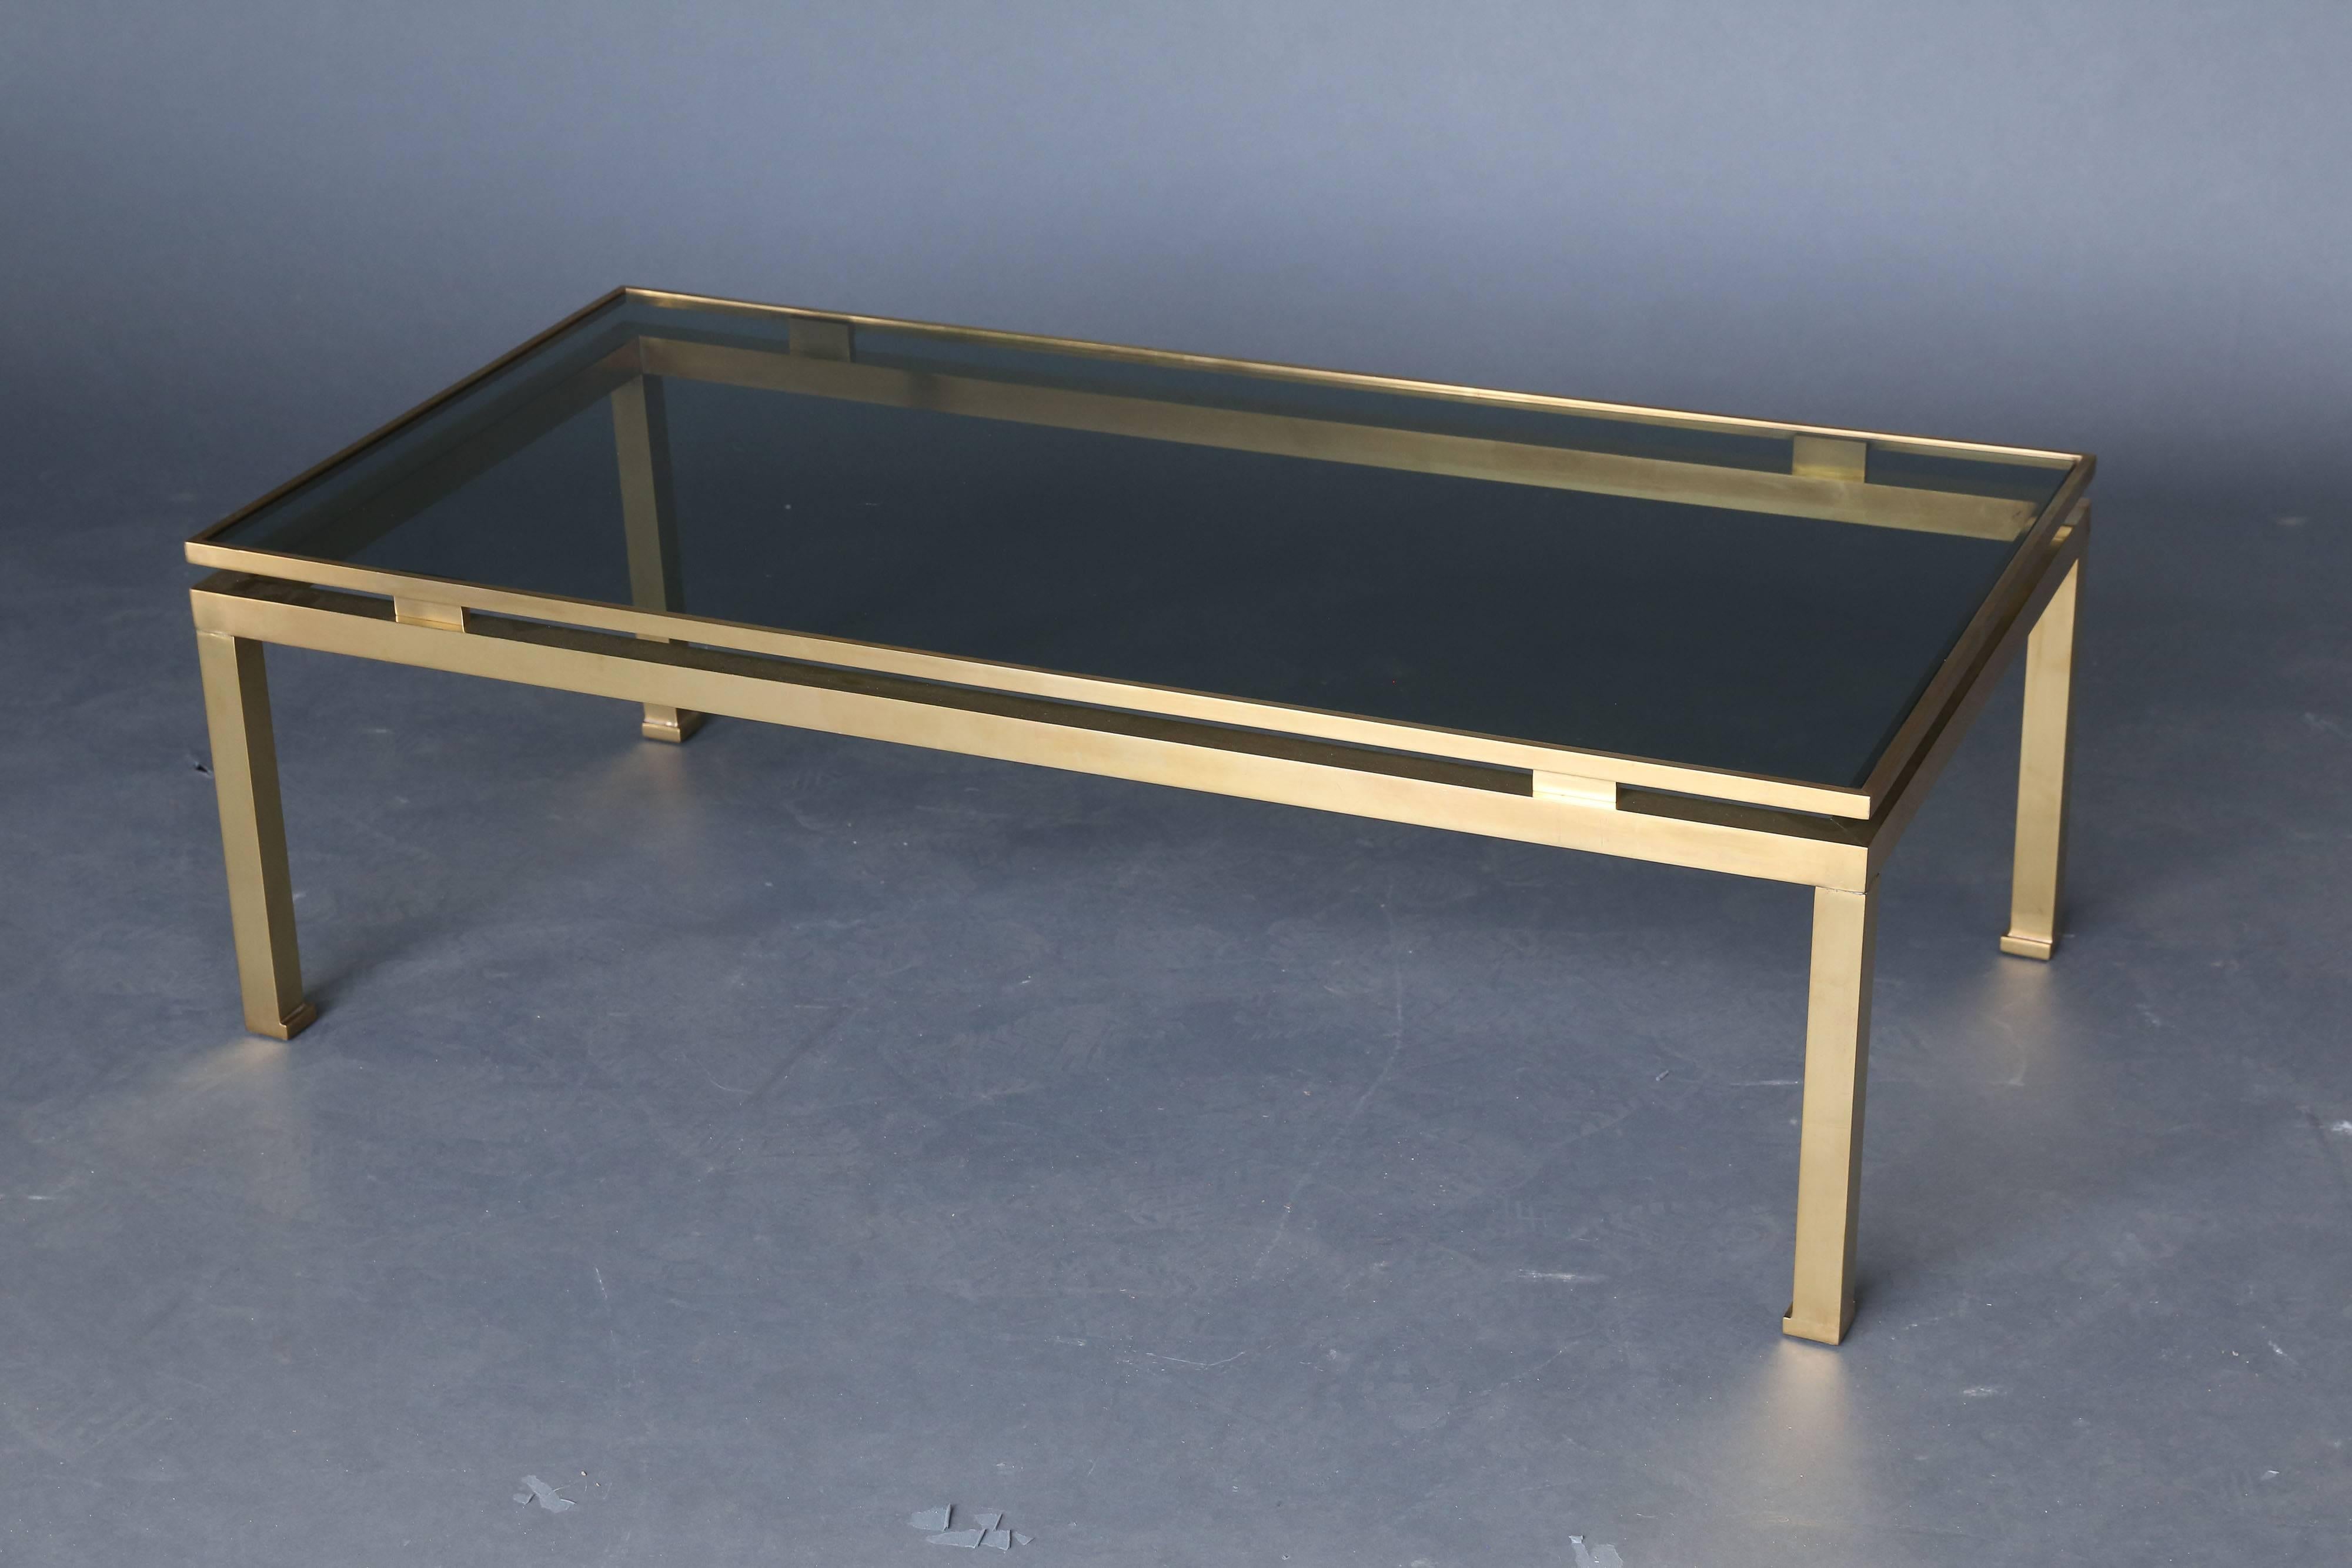 Mid-Century guy Lefevre for Maison Jansen. Brass perimeter and smoked glass top in excellent condition.